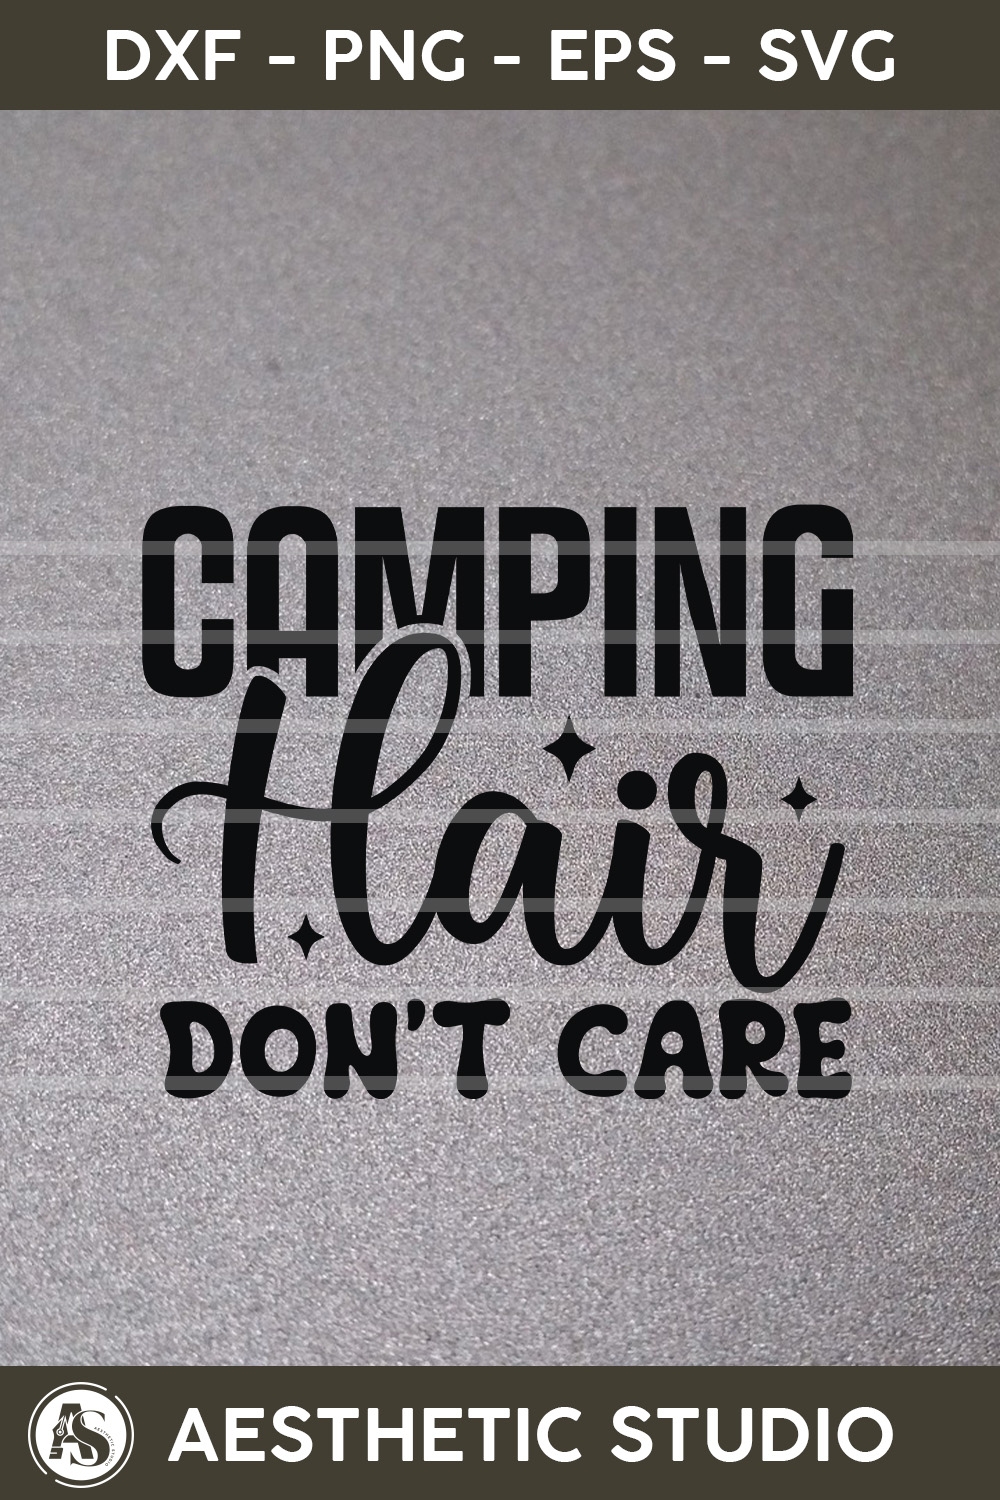 Camping Hair Don\'t Care, Camper, Adventure, Camp Life, Camping Svg, Typography, Camping Quotes, Camping Cut File, Funny Camping, Camping T-shirt Desig, Svg, Eps, Dxf, Png, Cut file pinterest preview image.